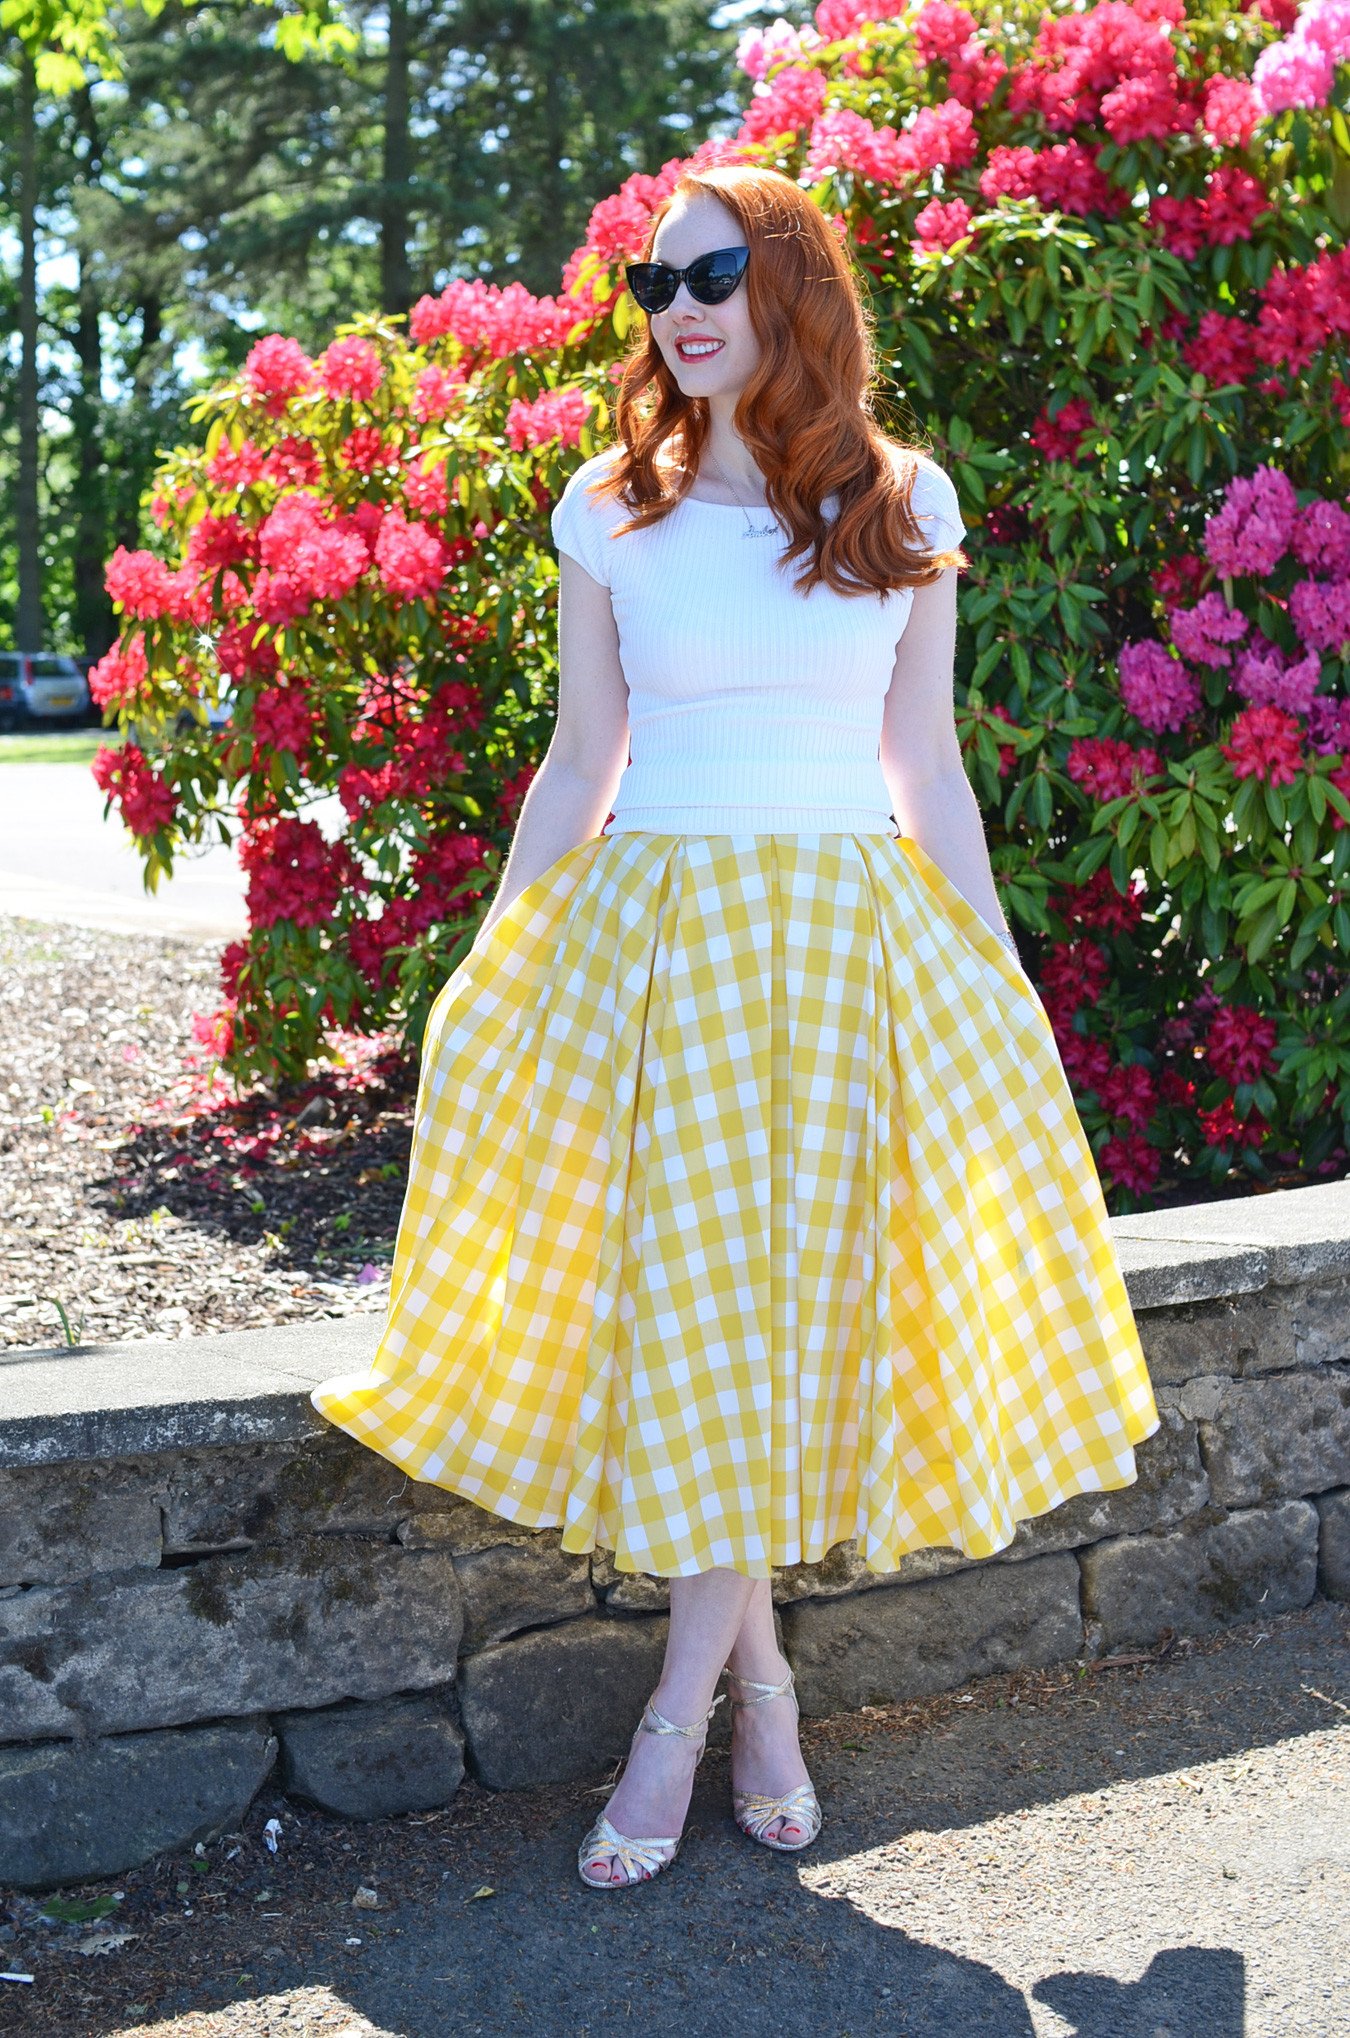 retro-inspired summer outfit: yellow gingham skirt with gold sandals